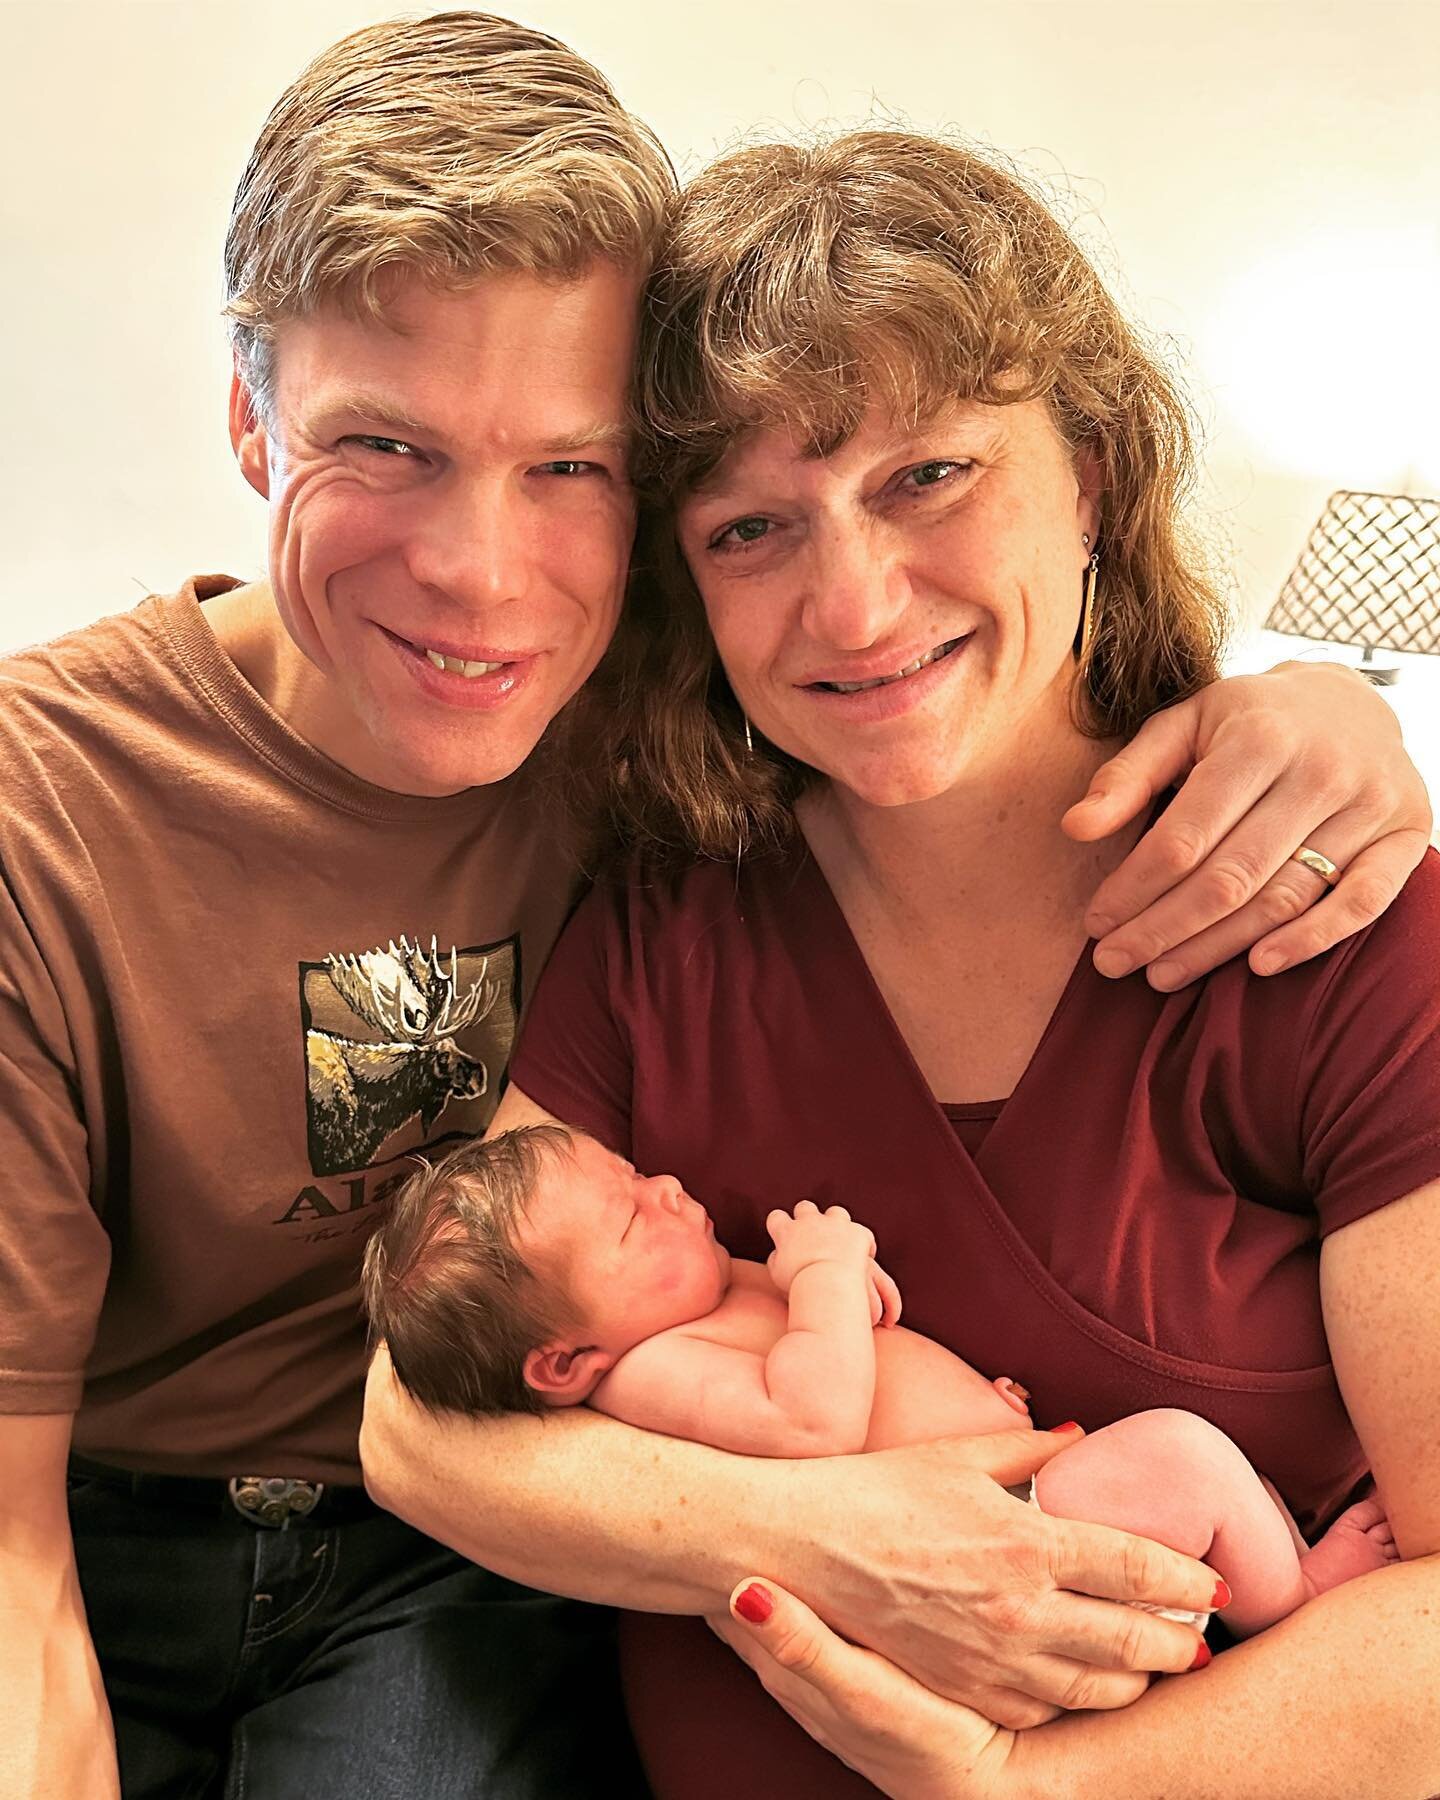 What a difference a year makes! Today marks the one year anniversary of the first baby born to ABLEMIDWIFE. Happy happy birthday sweet Heather! We feel so blessed to be able continue to serve the families we have grown to know and love for years, eve